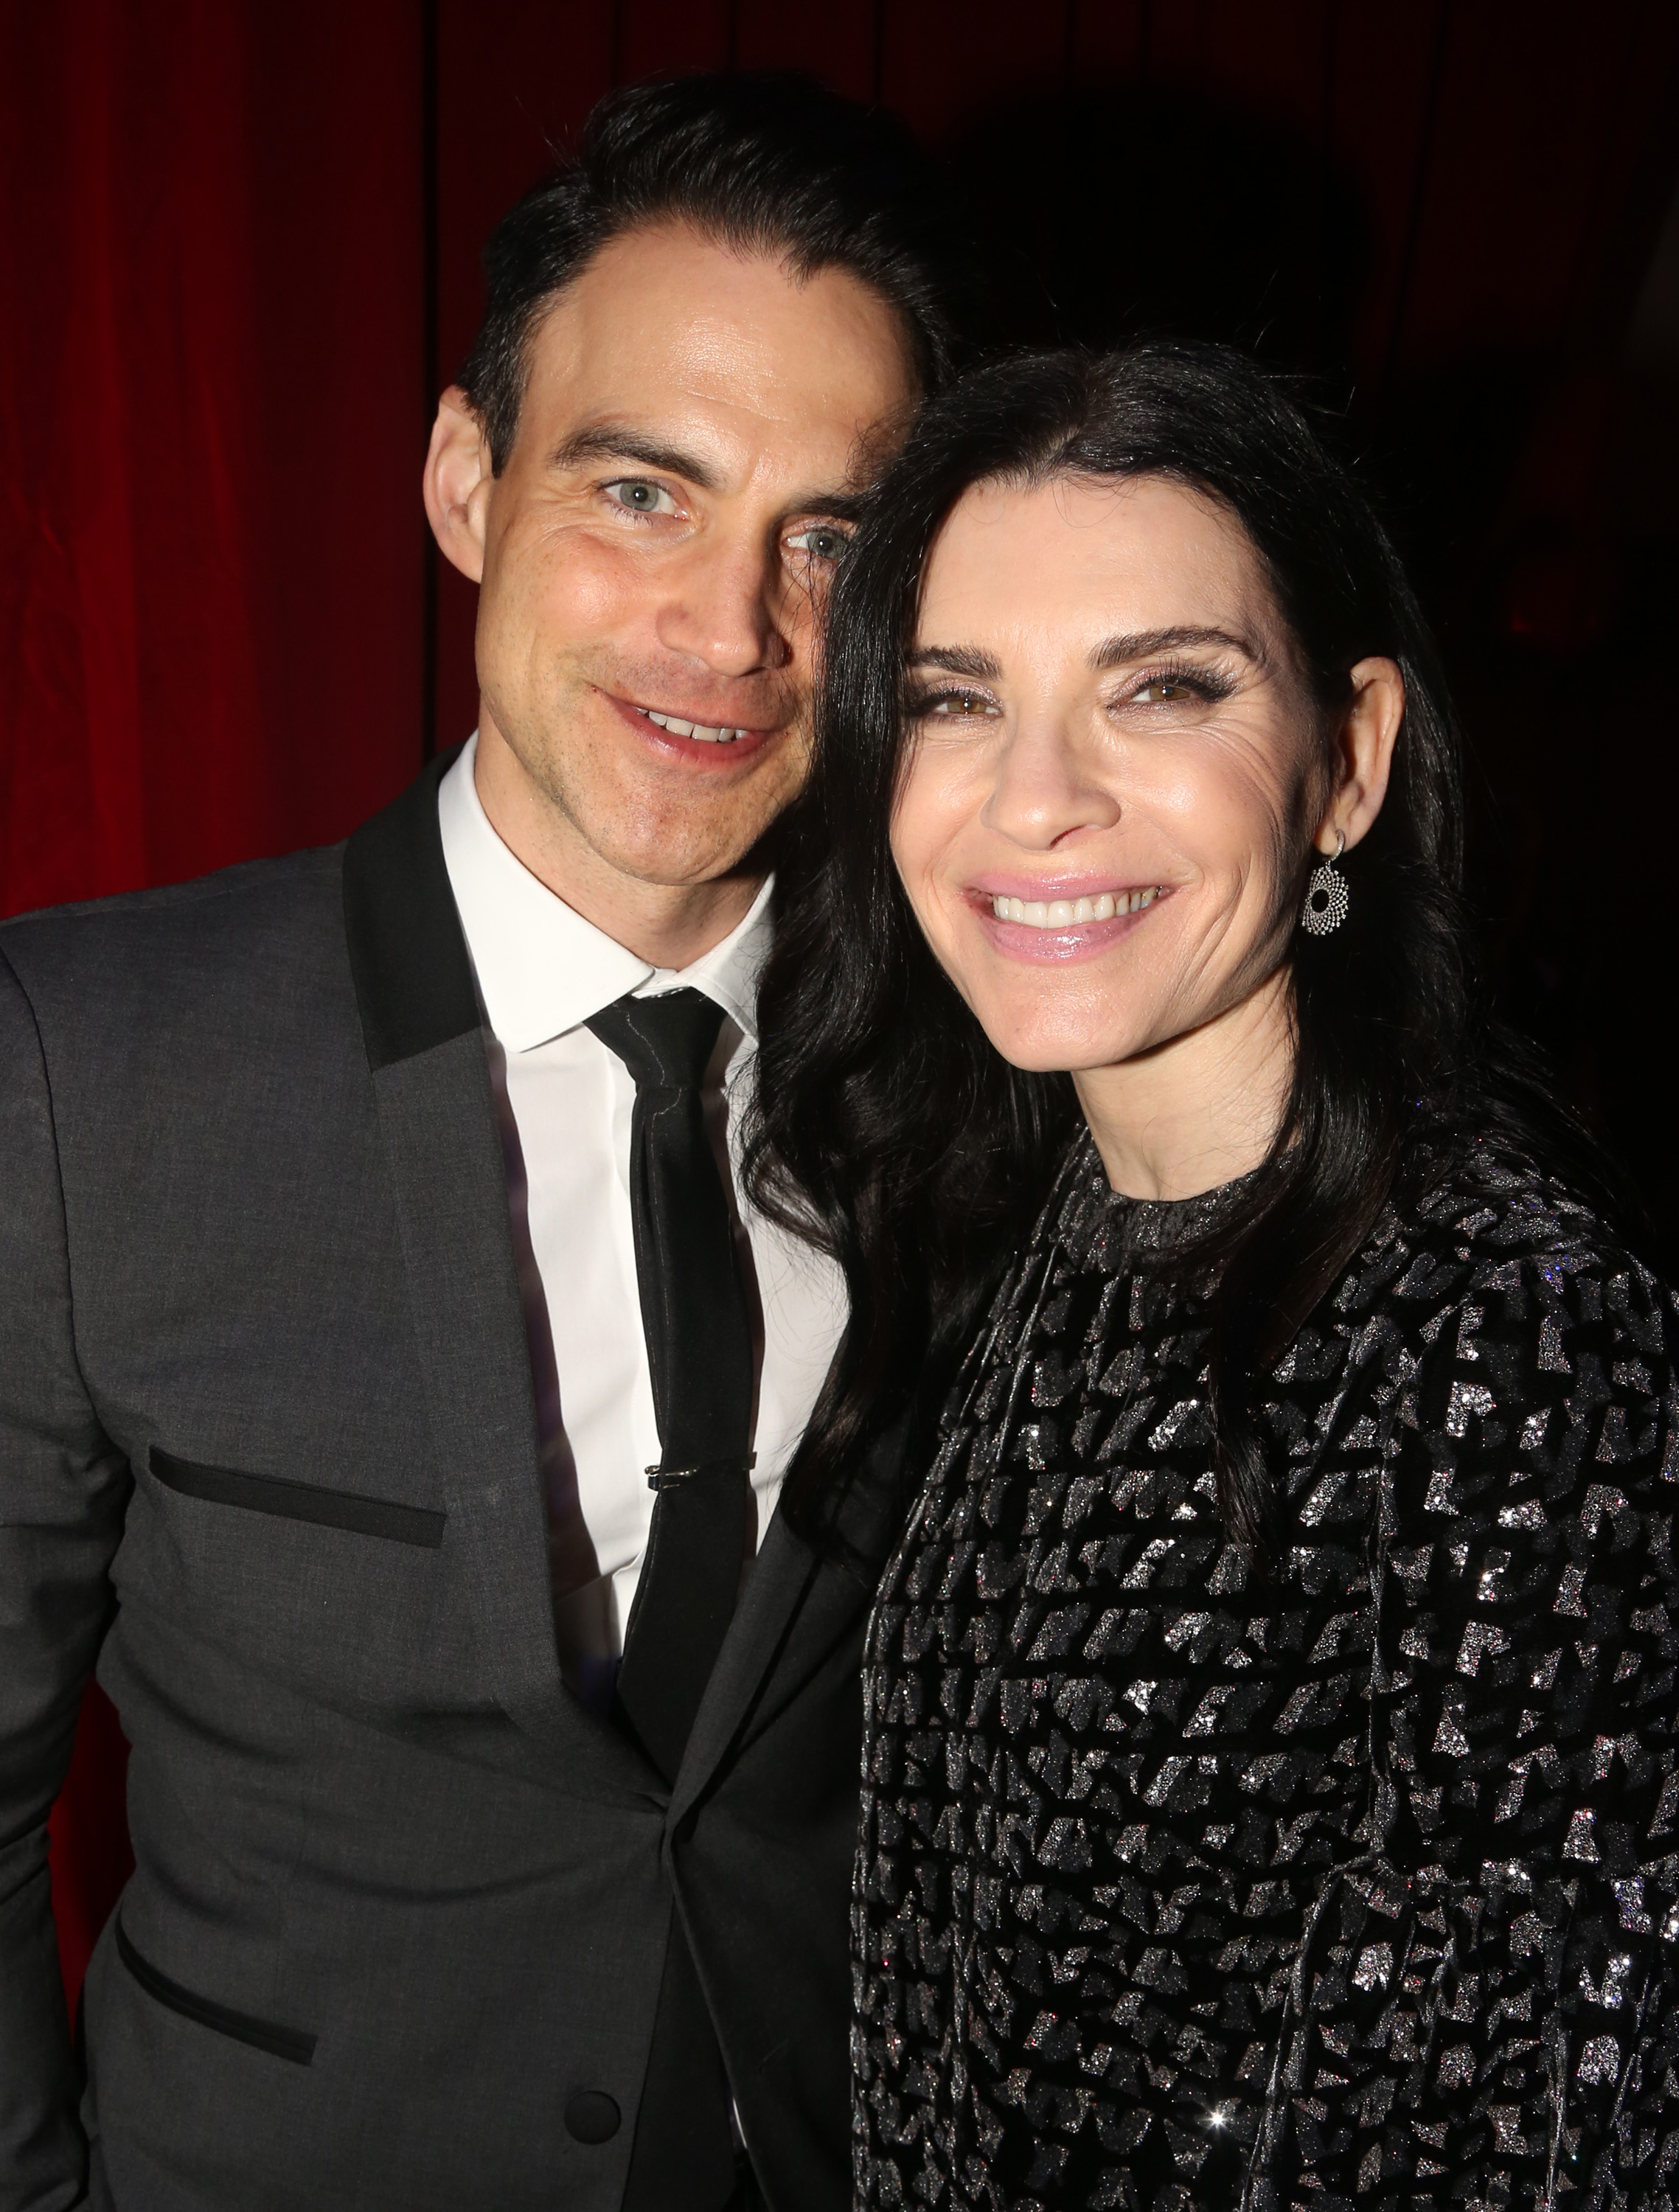 Keith Lieberthal and Julianna Margulies at the 2020 Roundabout Theater Gala honoring Alan Cumming, Michael Kors & Lance LePere on March 2, 2020, in New York City. | Source: Getty Images